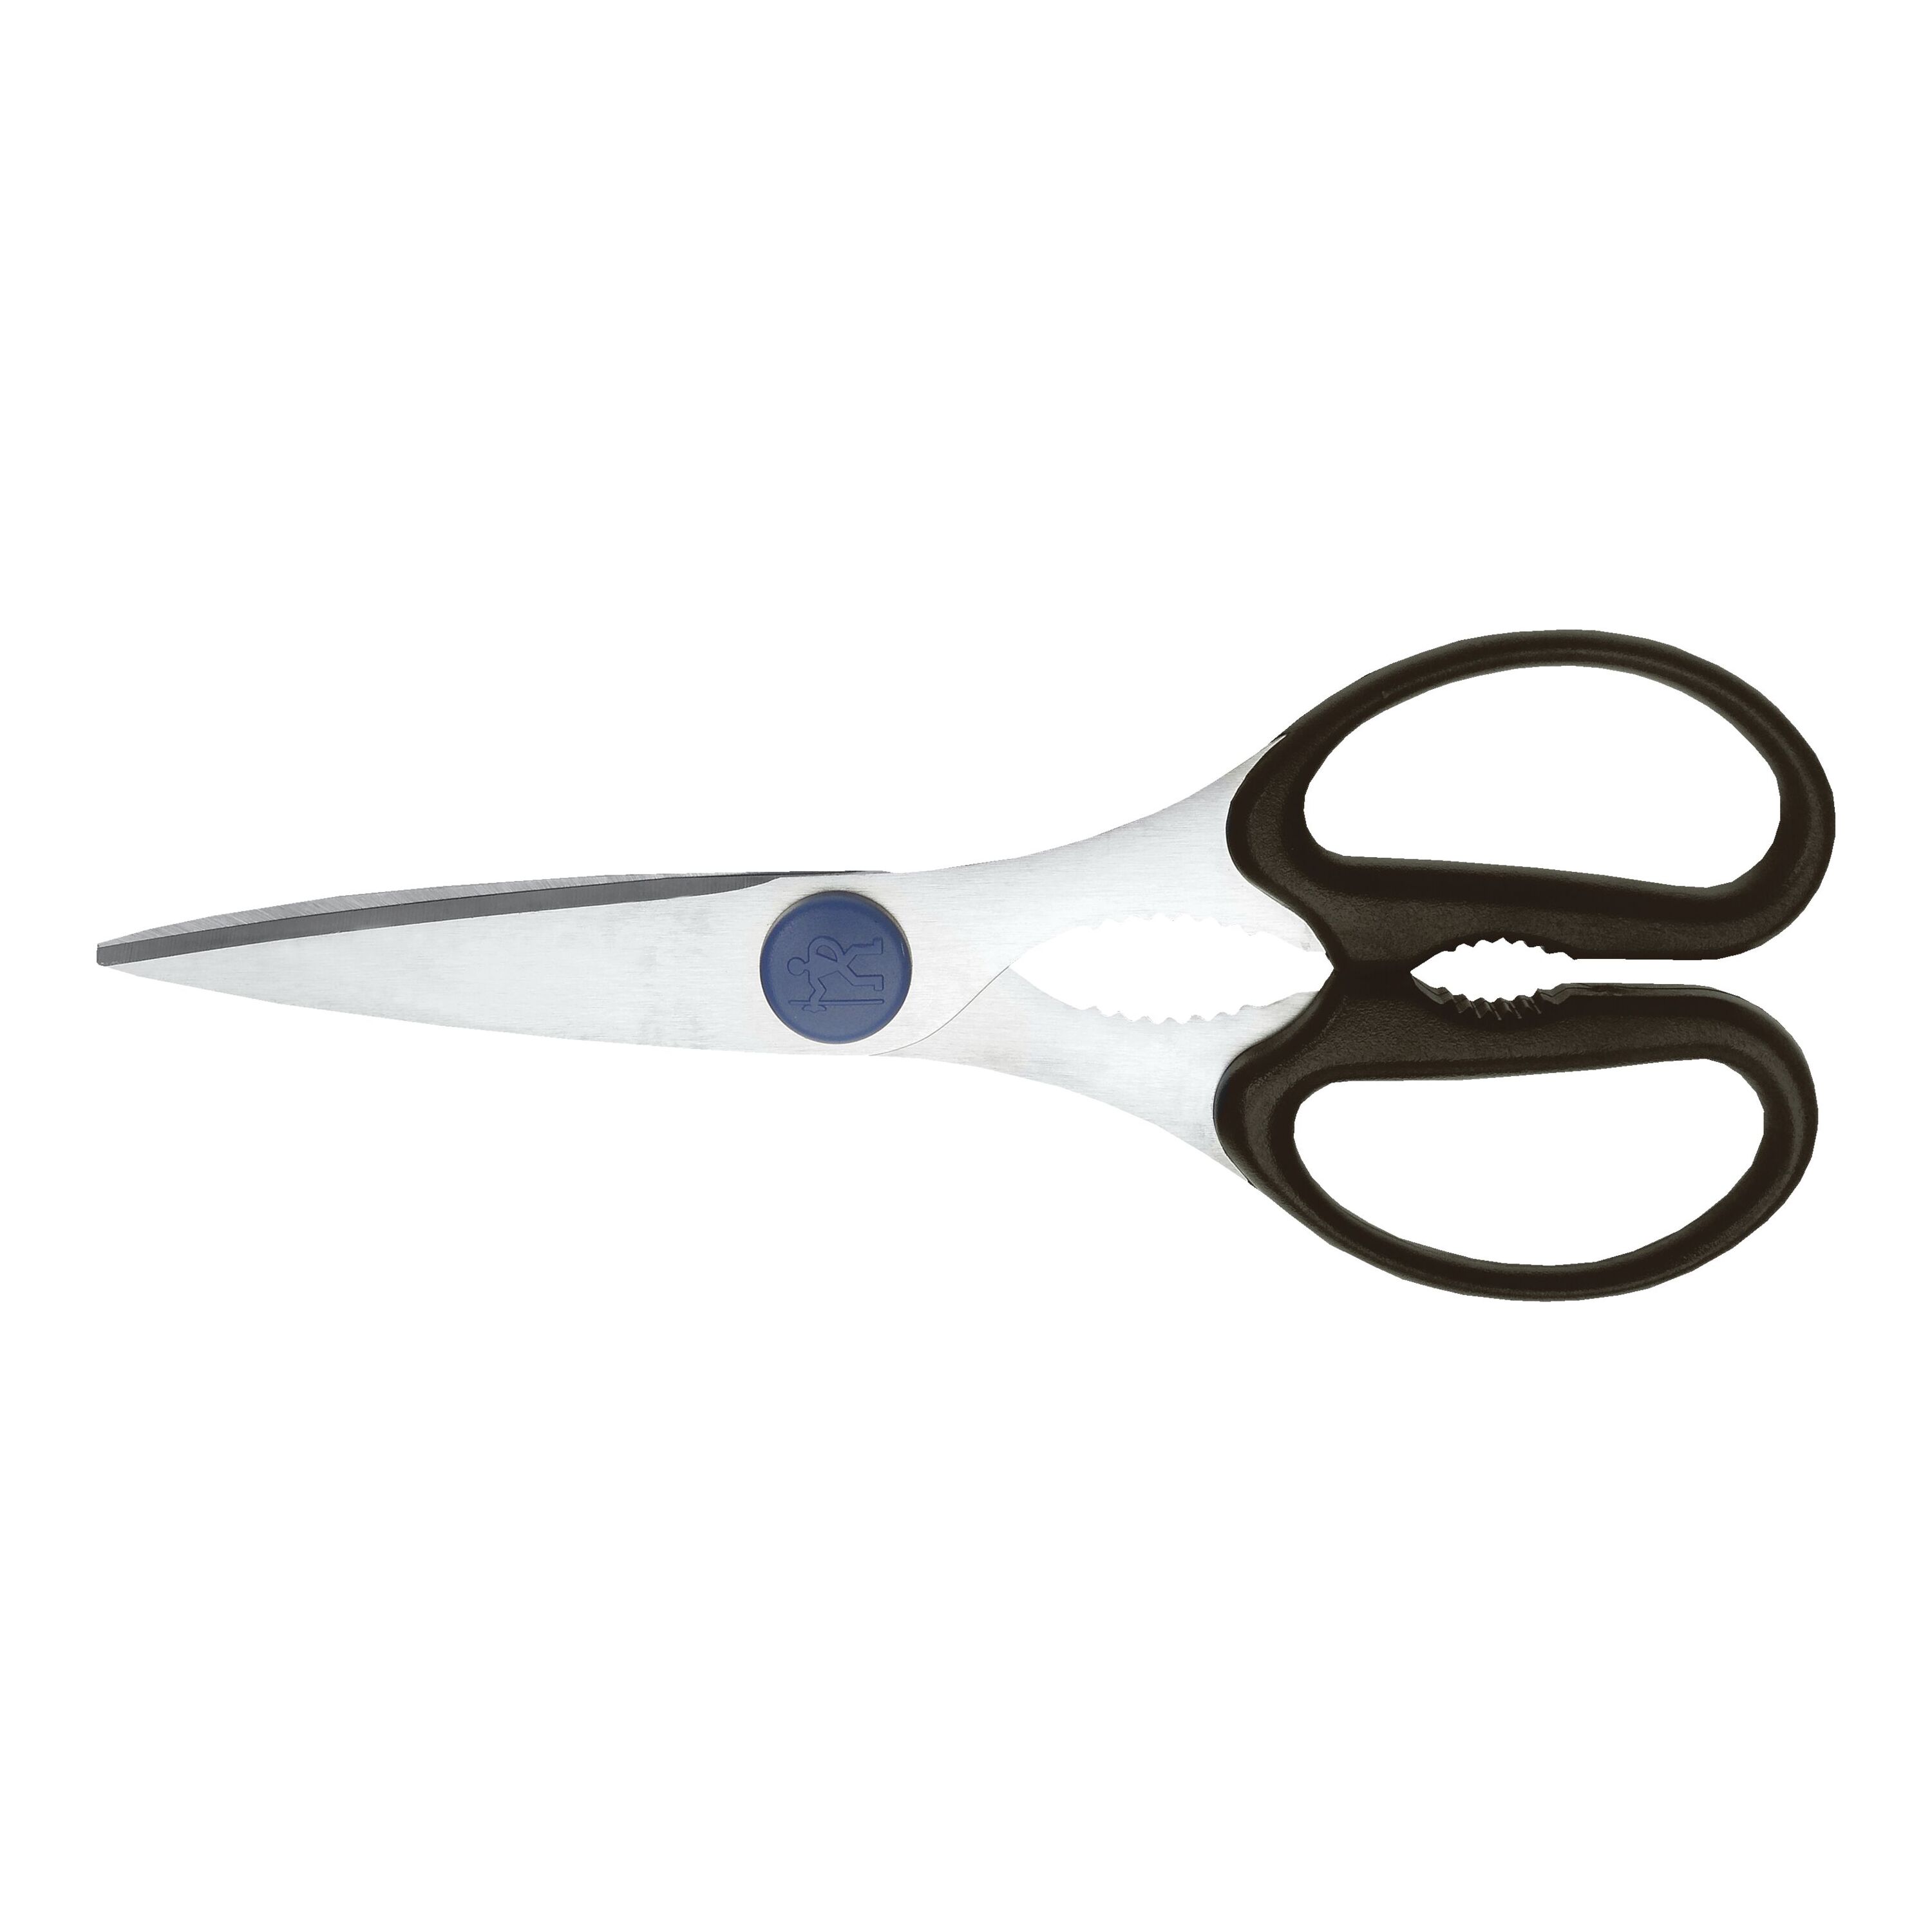 Kitchen Shears Are the Kitchen Tool You're Definitely Not Using